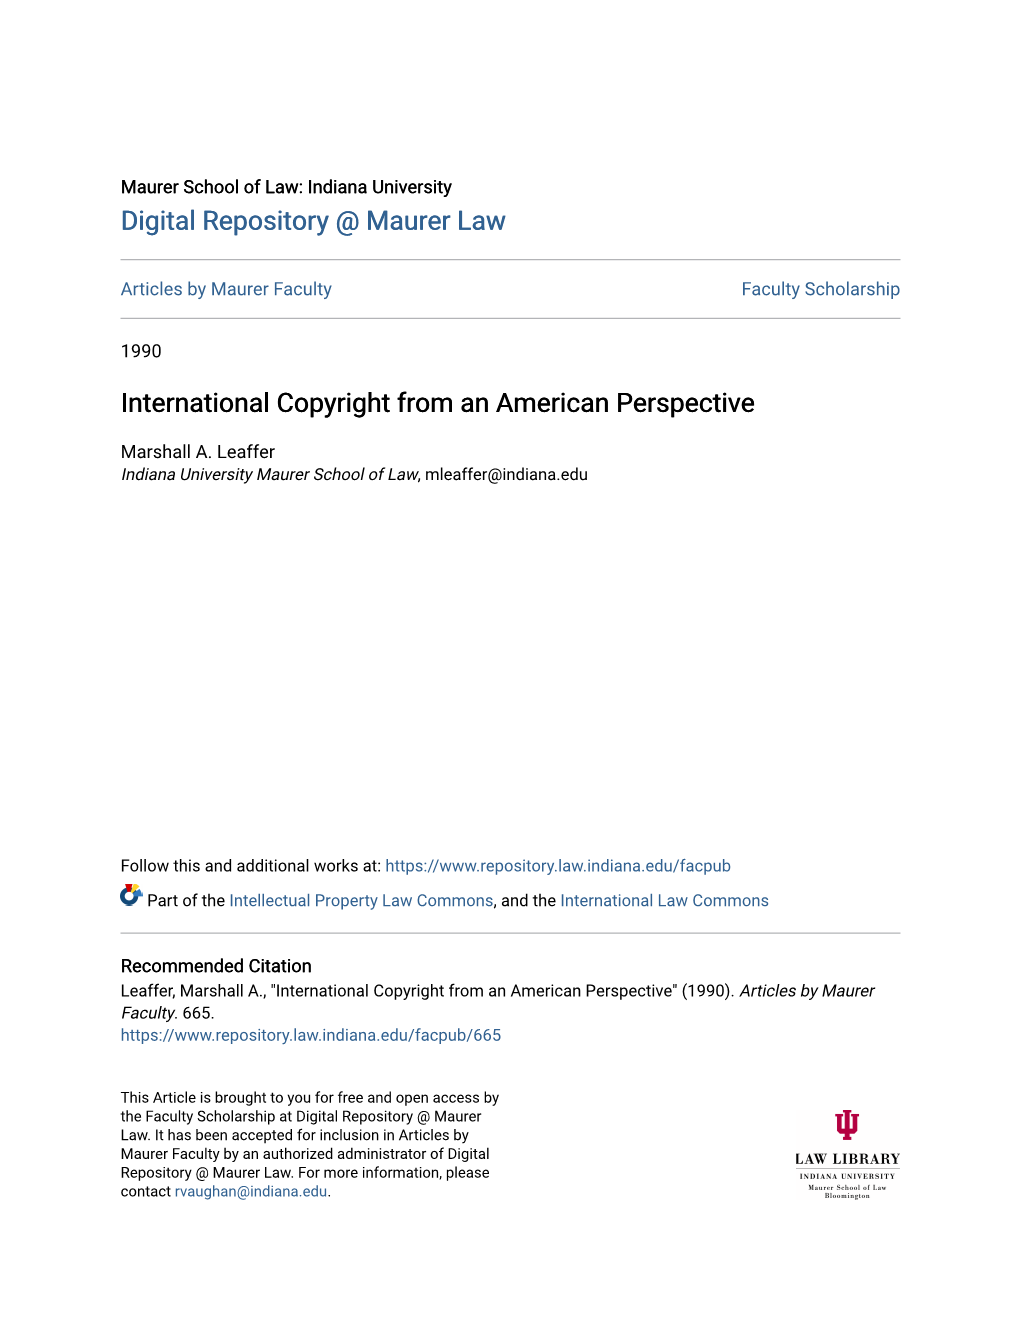 International Copyright from an American Perspective